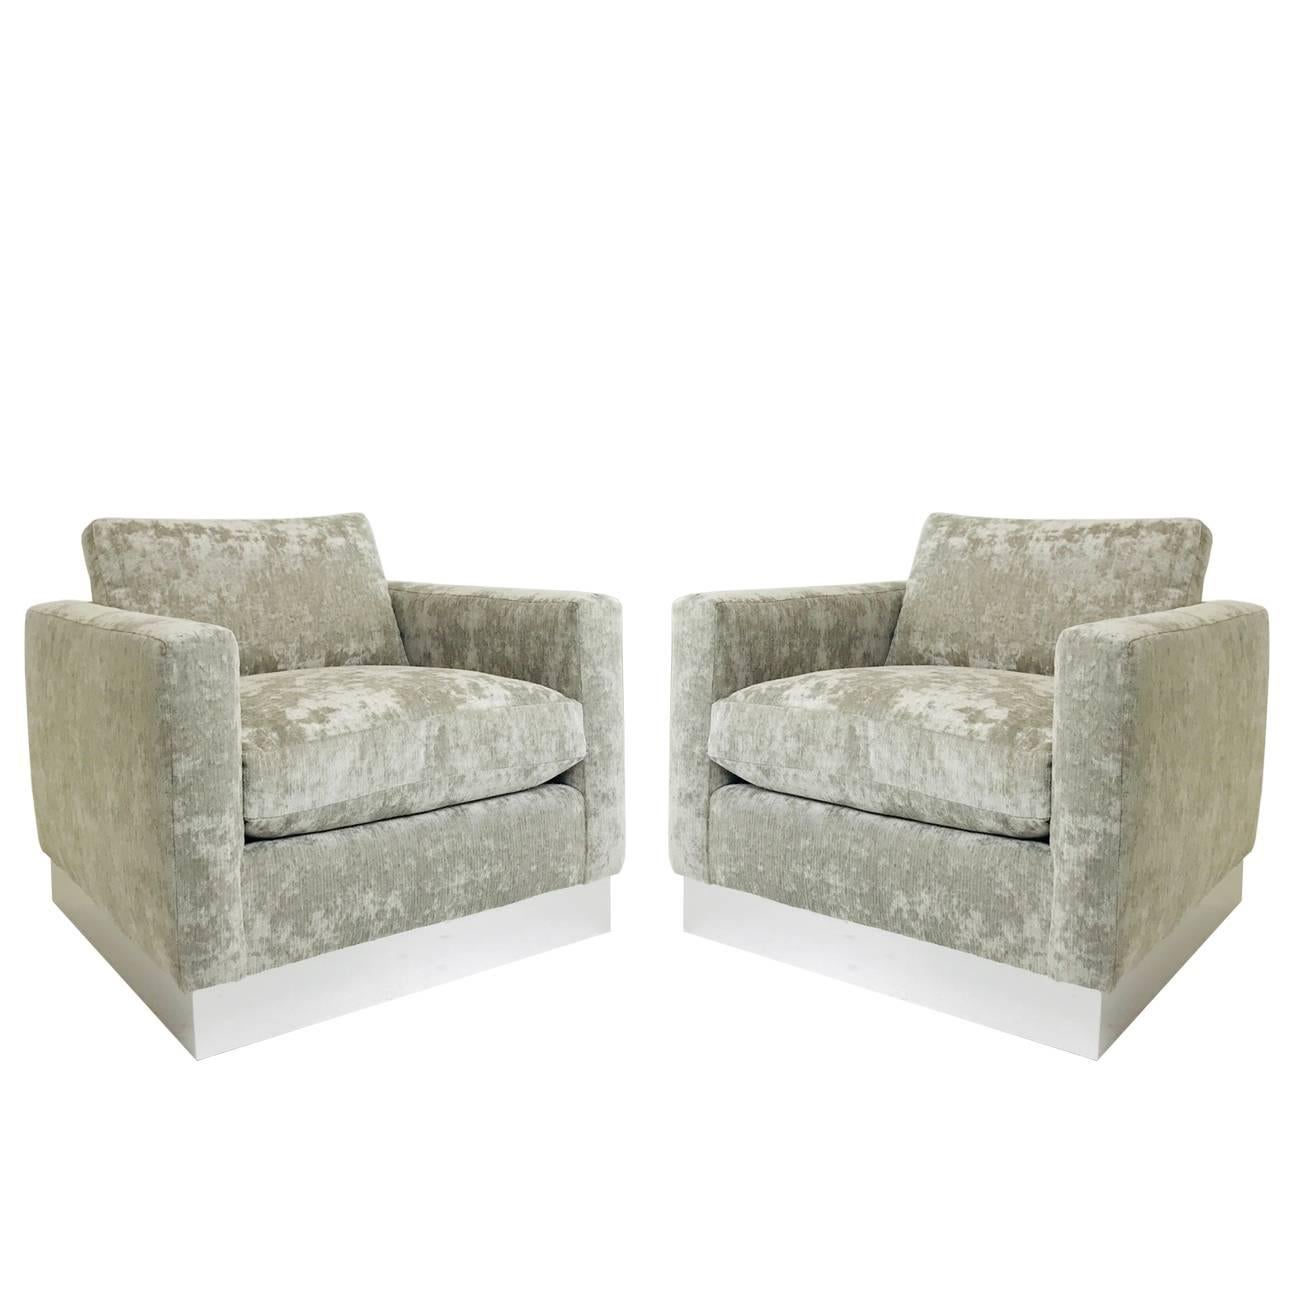 Pair of Milo Baughman Cube Chairs with Plinth Base